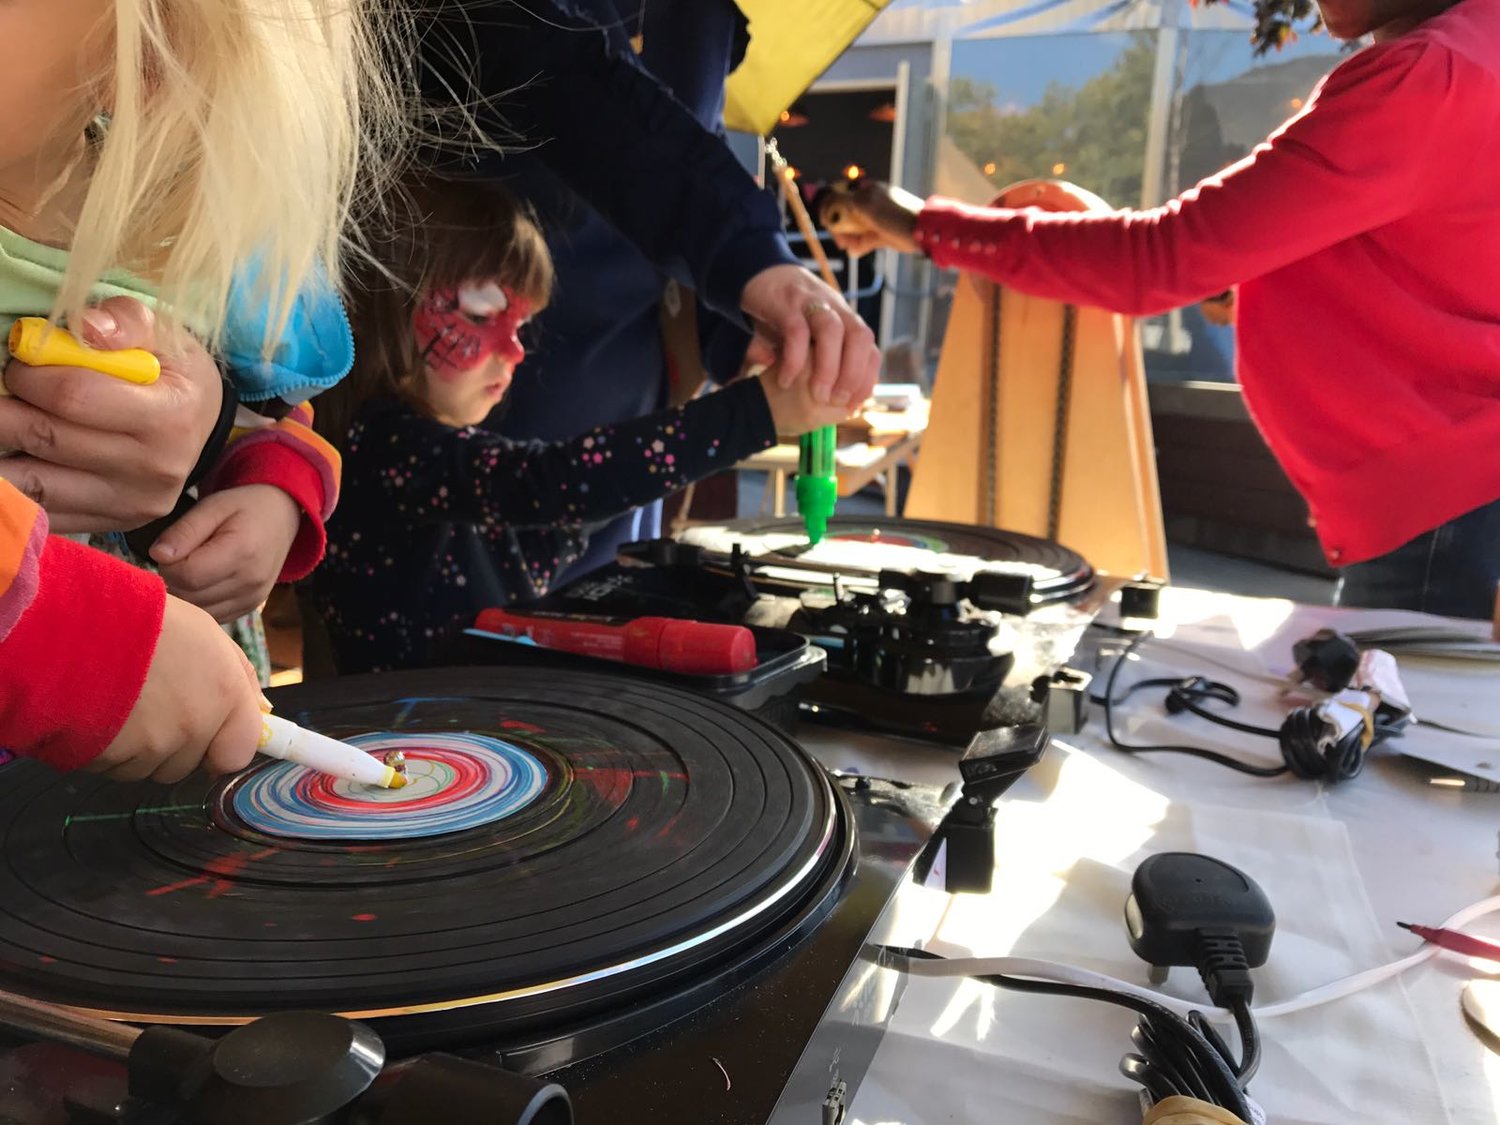 Spinning art at High Tide festival with Bebop Baby.